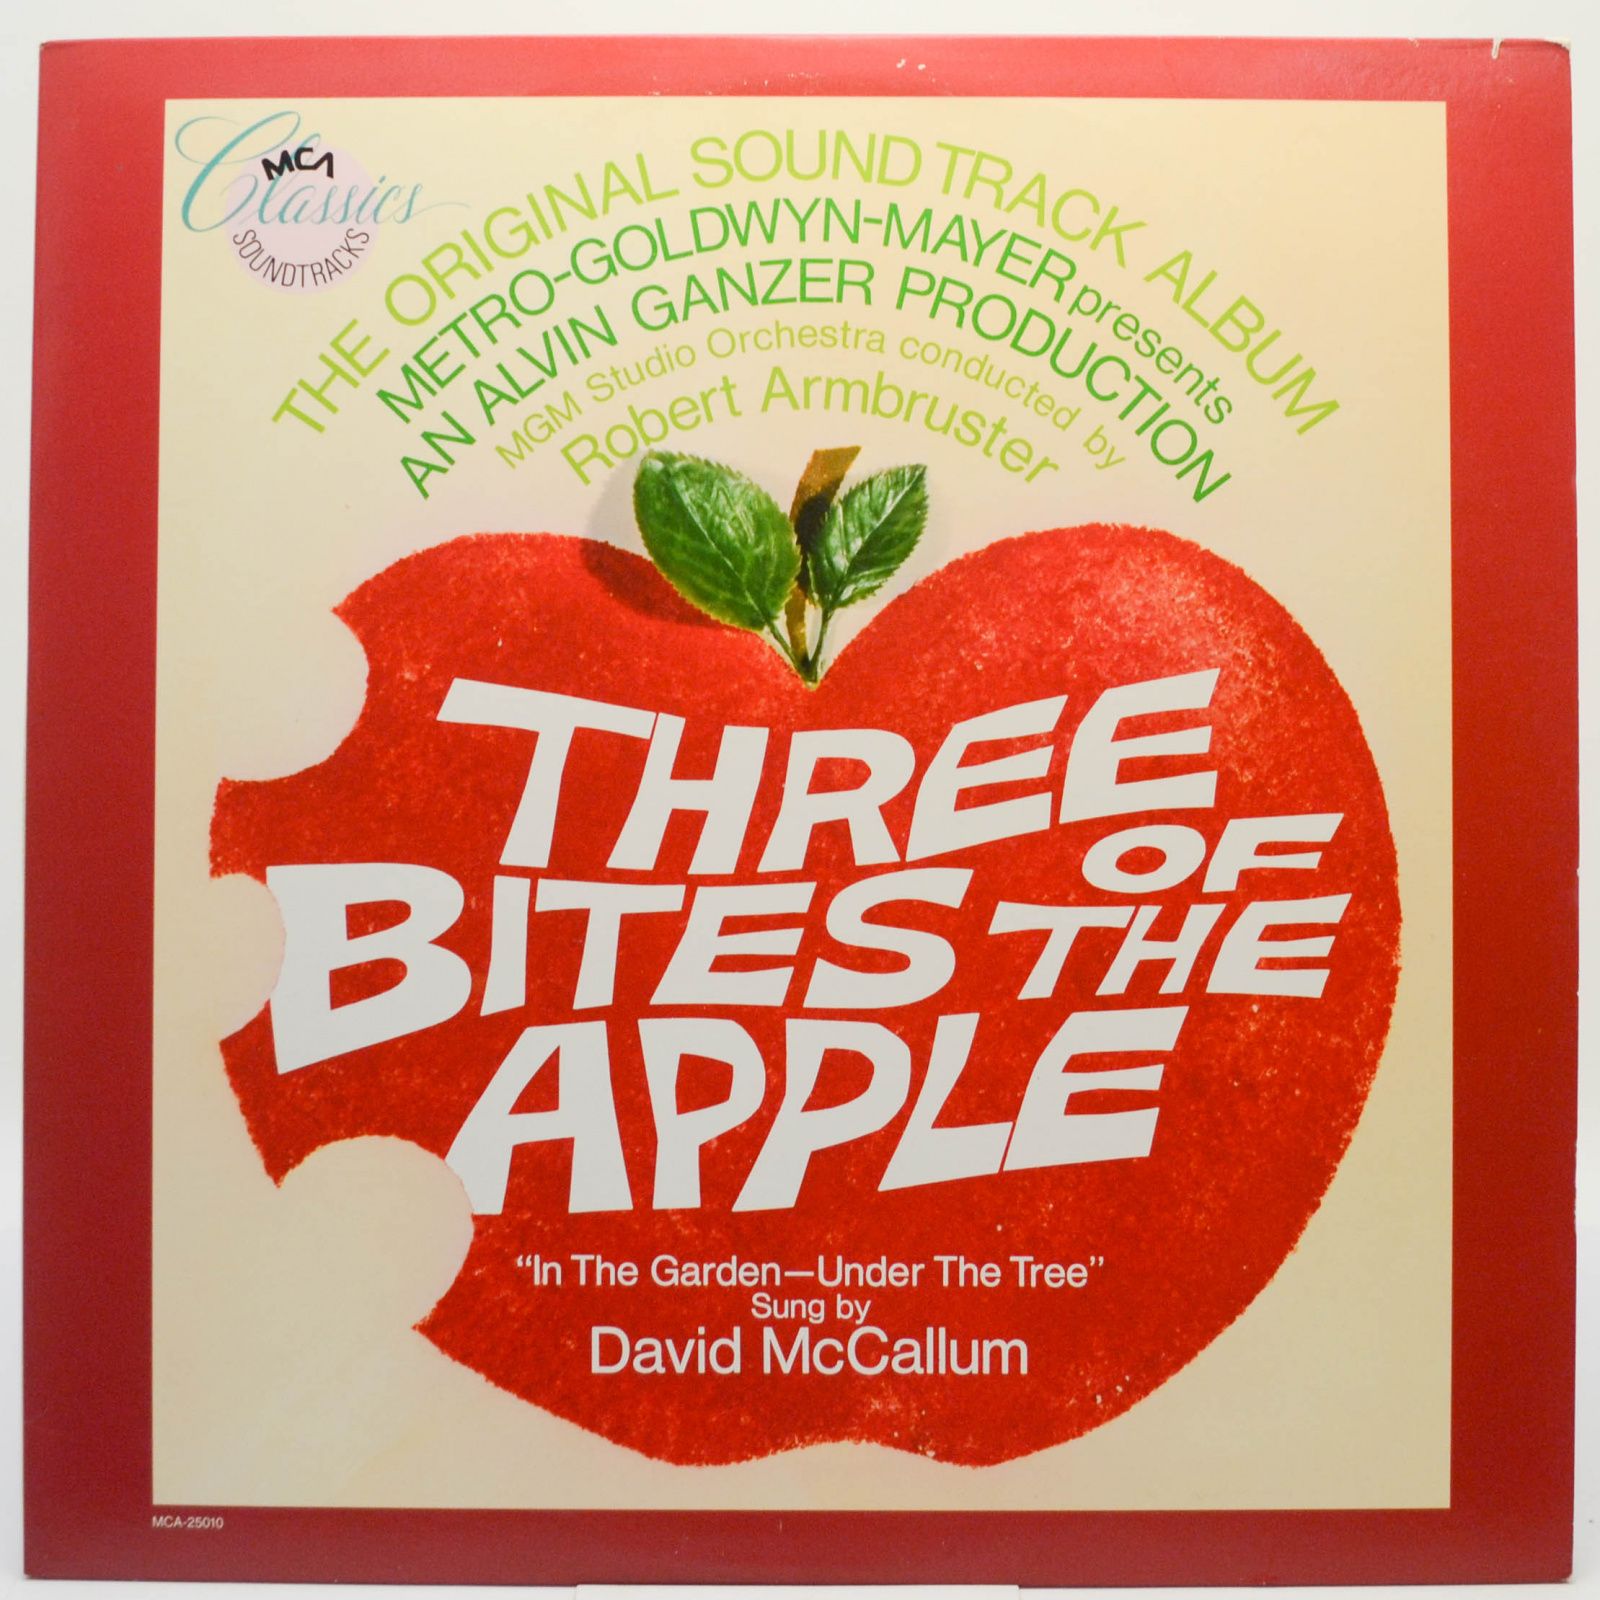 MGM Studio Orchestra Conducted By Robert Armbruster — Three Bites Of The Apple (The Original Sound Track Album), 1986